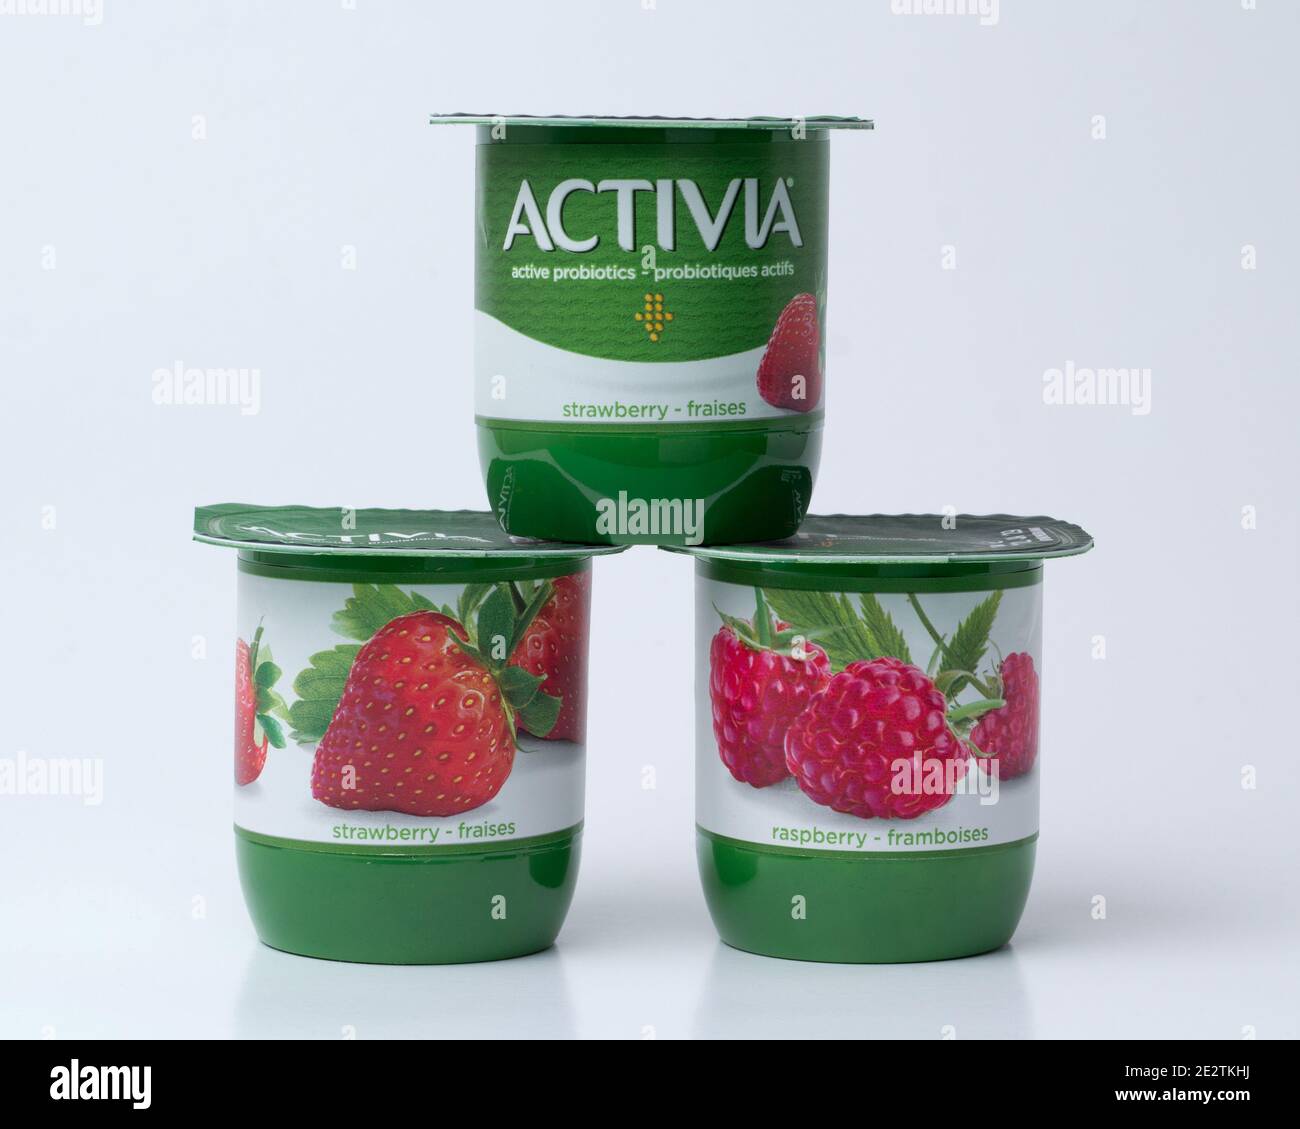 Pleasant Valley, Canada - January 14, 2021: Activia yogurt pots on neutral background. Activia is a brand of yogurt owned by the Groupe Danon corporat Stock Photo